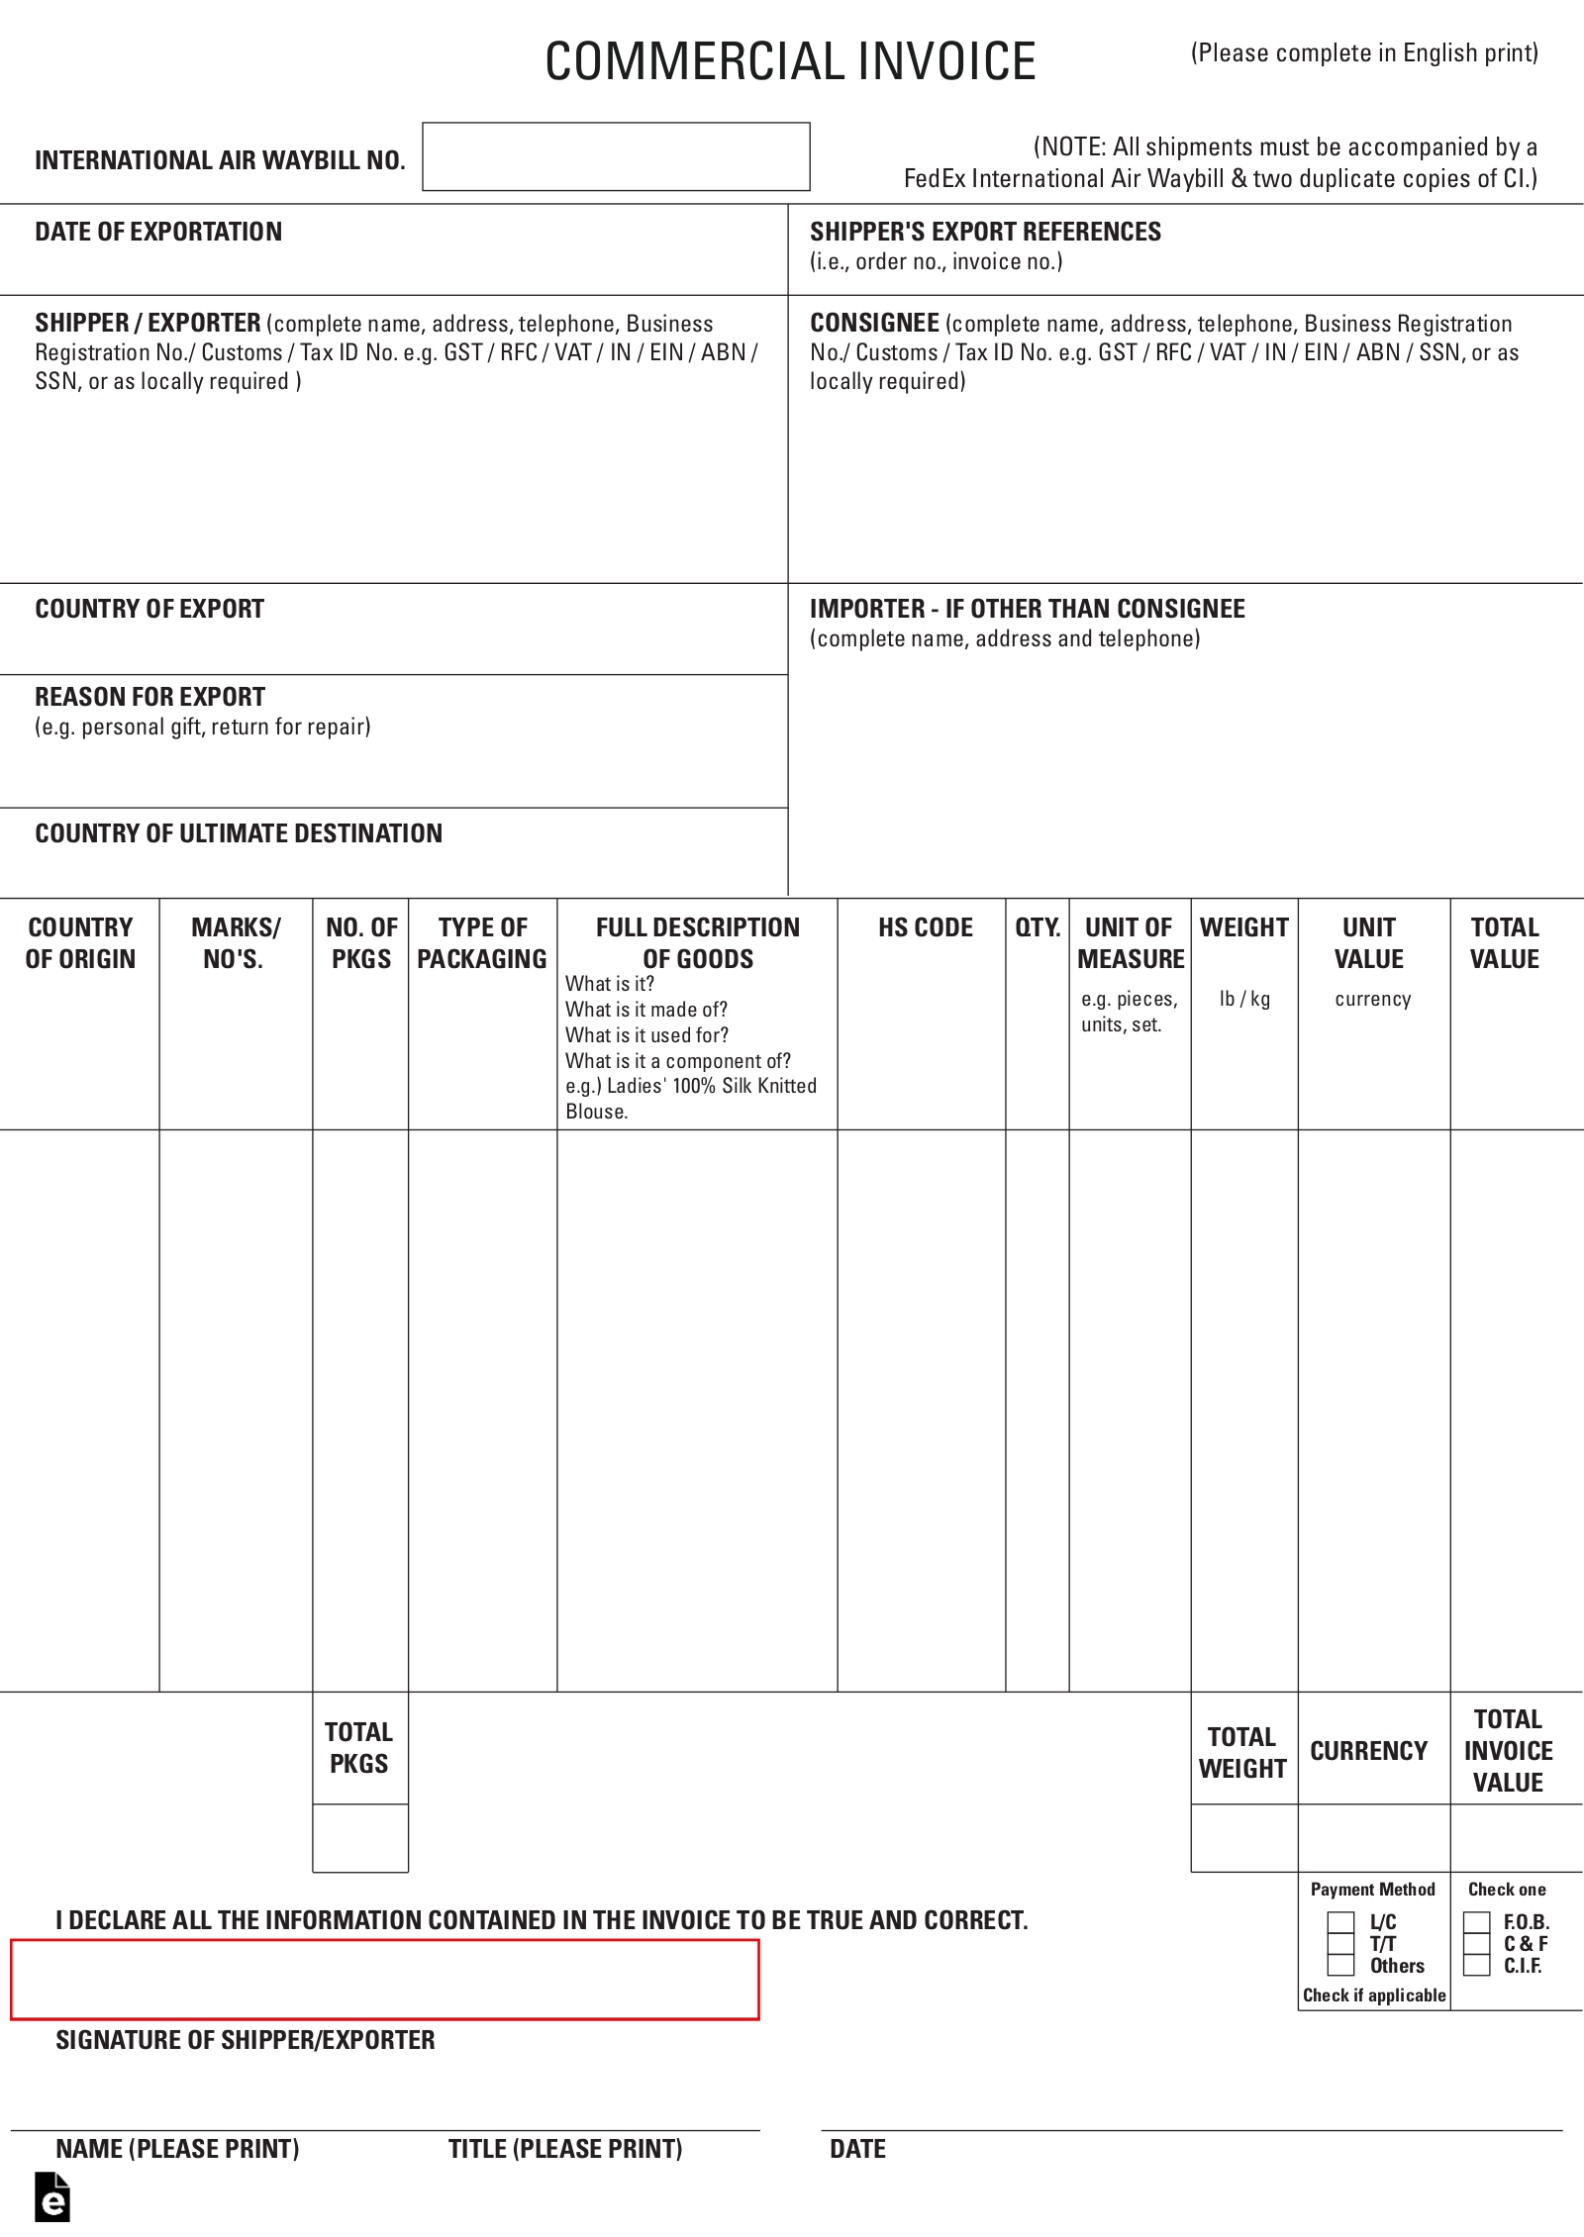 Free International Commercial Invoice Templates - Pdf - Eforms within Fillable Invoice Template Pdf